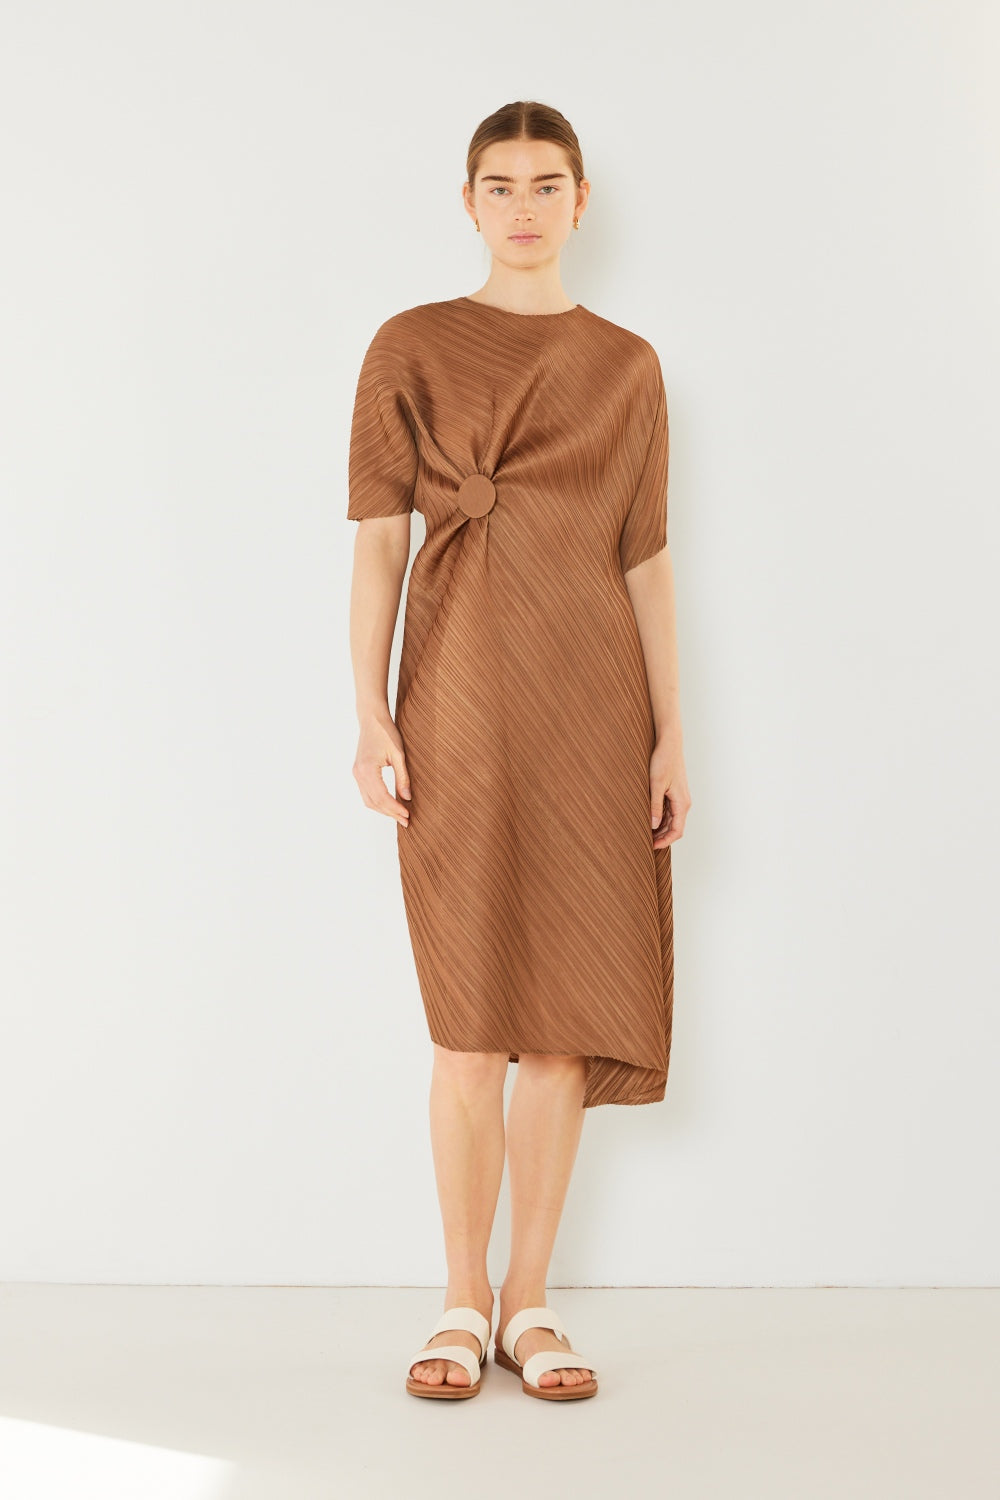 The Pleated Dolman Sleeve Dress is a modern and chic addition to your wardrobe. With its unique dolman sleeves and pleated detailing, this dress offers a stylish and sophisticated look. The relaxed silhouette and pleats create a flattering and comfortable fit.